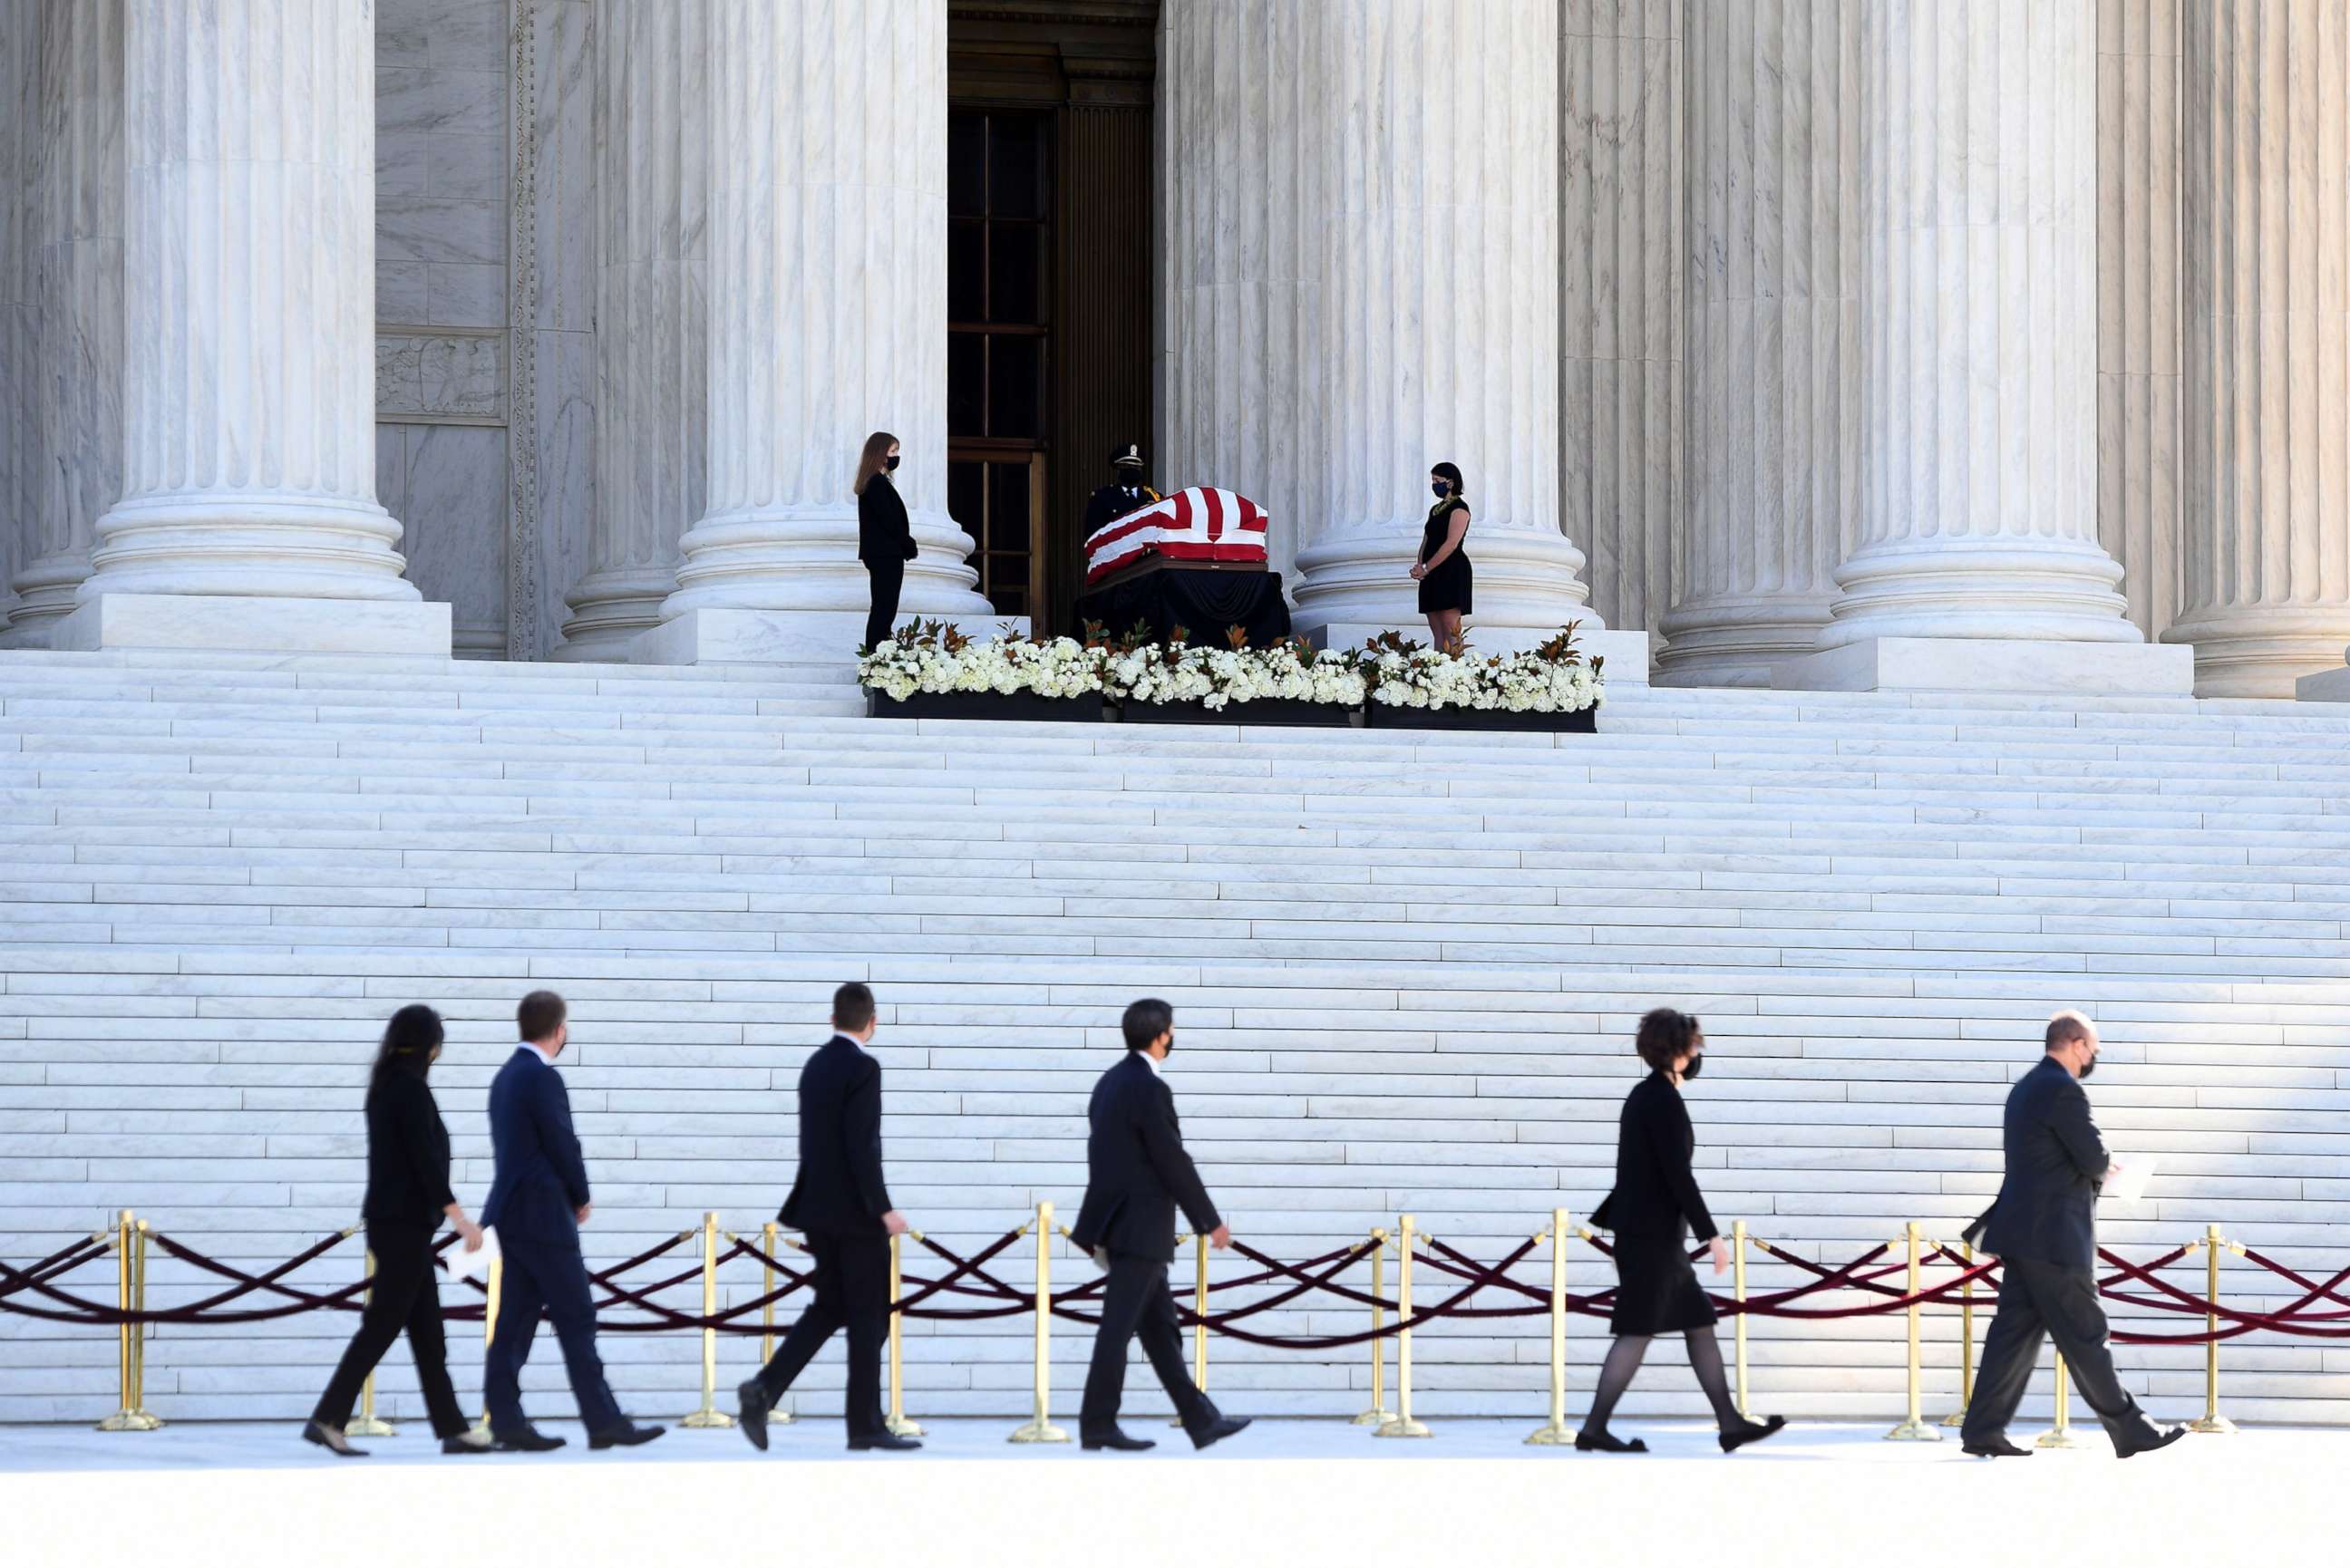 PHOTO: The casket of Supreme Court Justice Ruth Bader Ginsburg is placed on the steps of the U.S. Supreme Court in Washington, D.C., Sept.23, 2020.